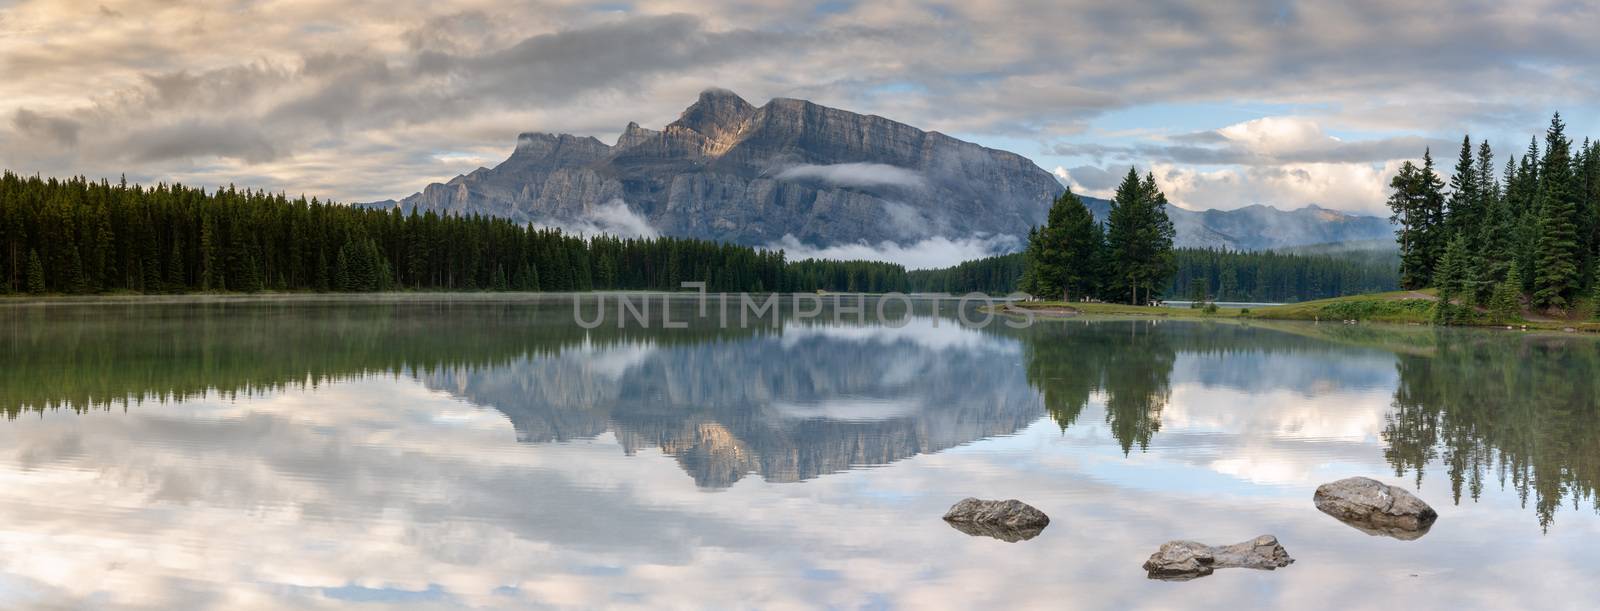 Mount Rundle and Two Jack Lake with early morning mood, Banff Na by alfotokunst